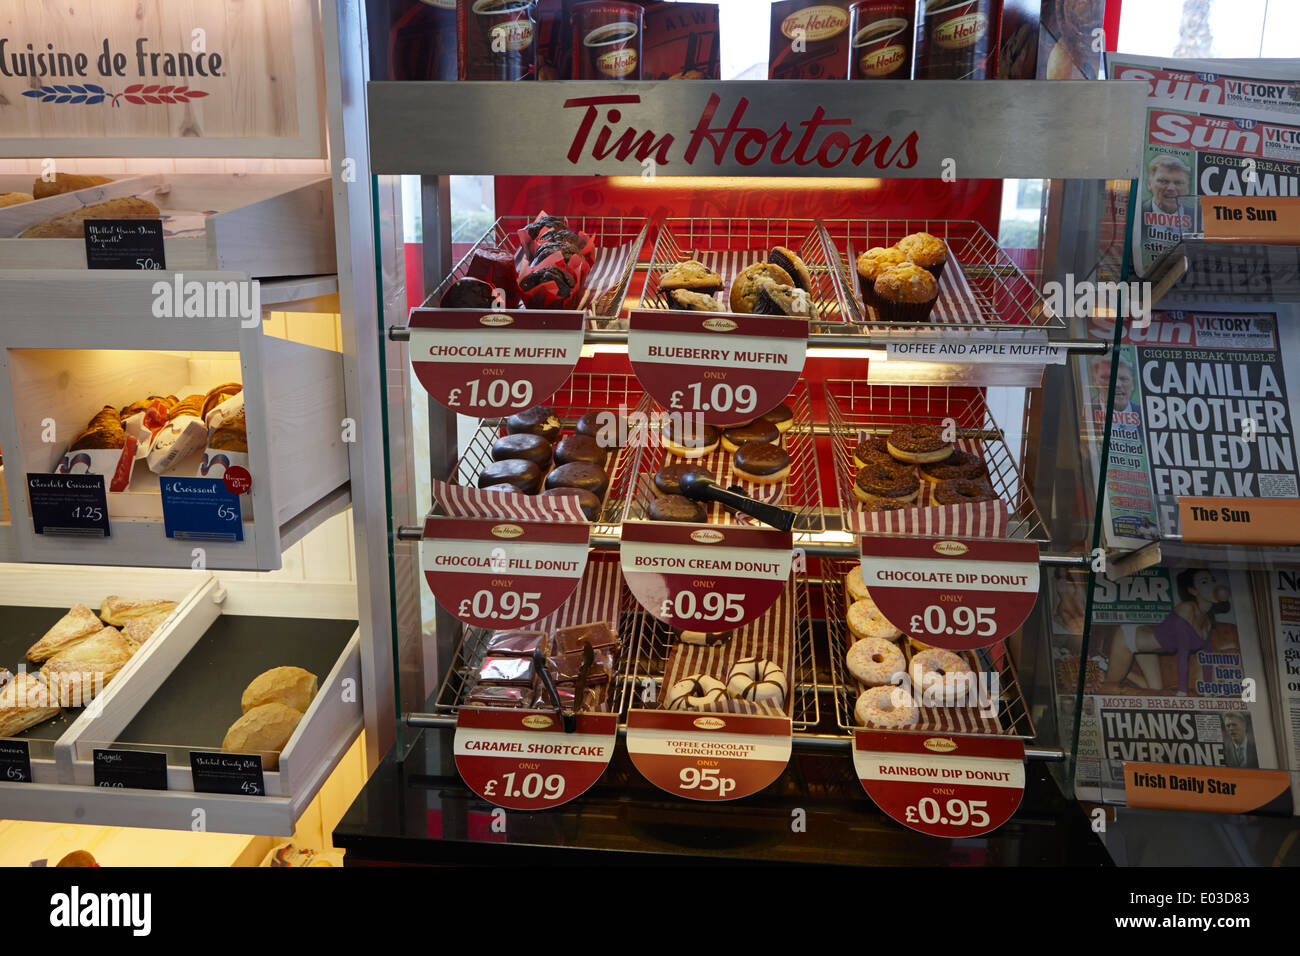 tim hortons donuts display in a filling station convenience store in northern ireland Stock Photo